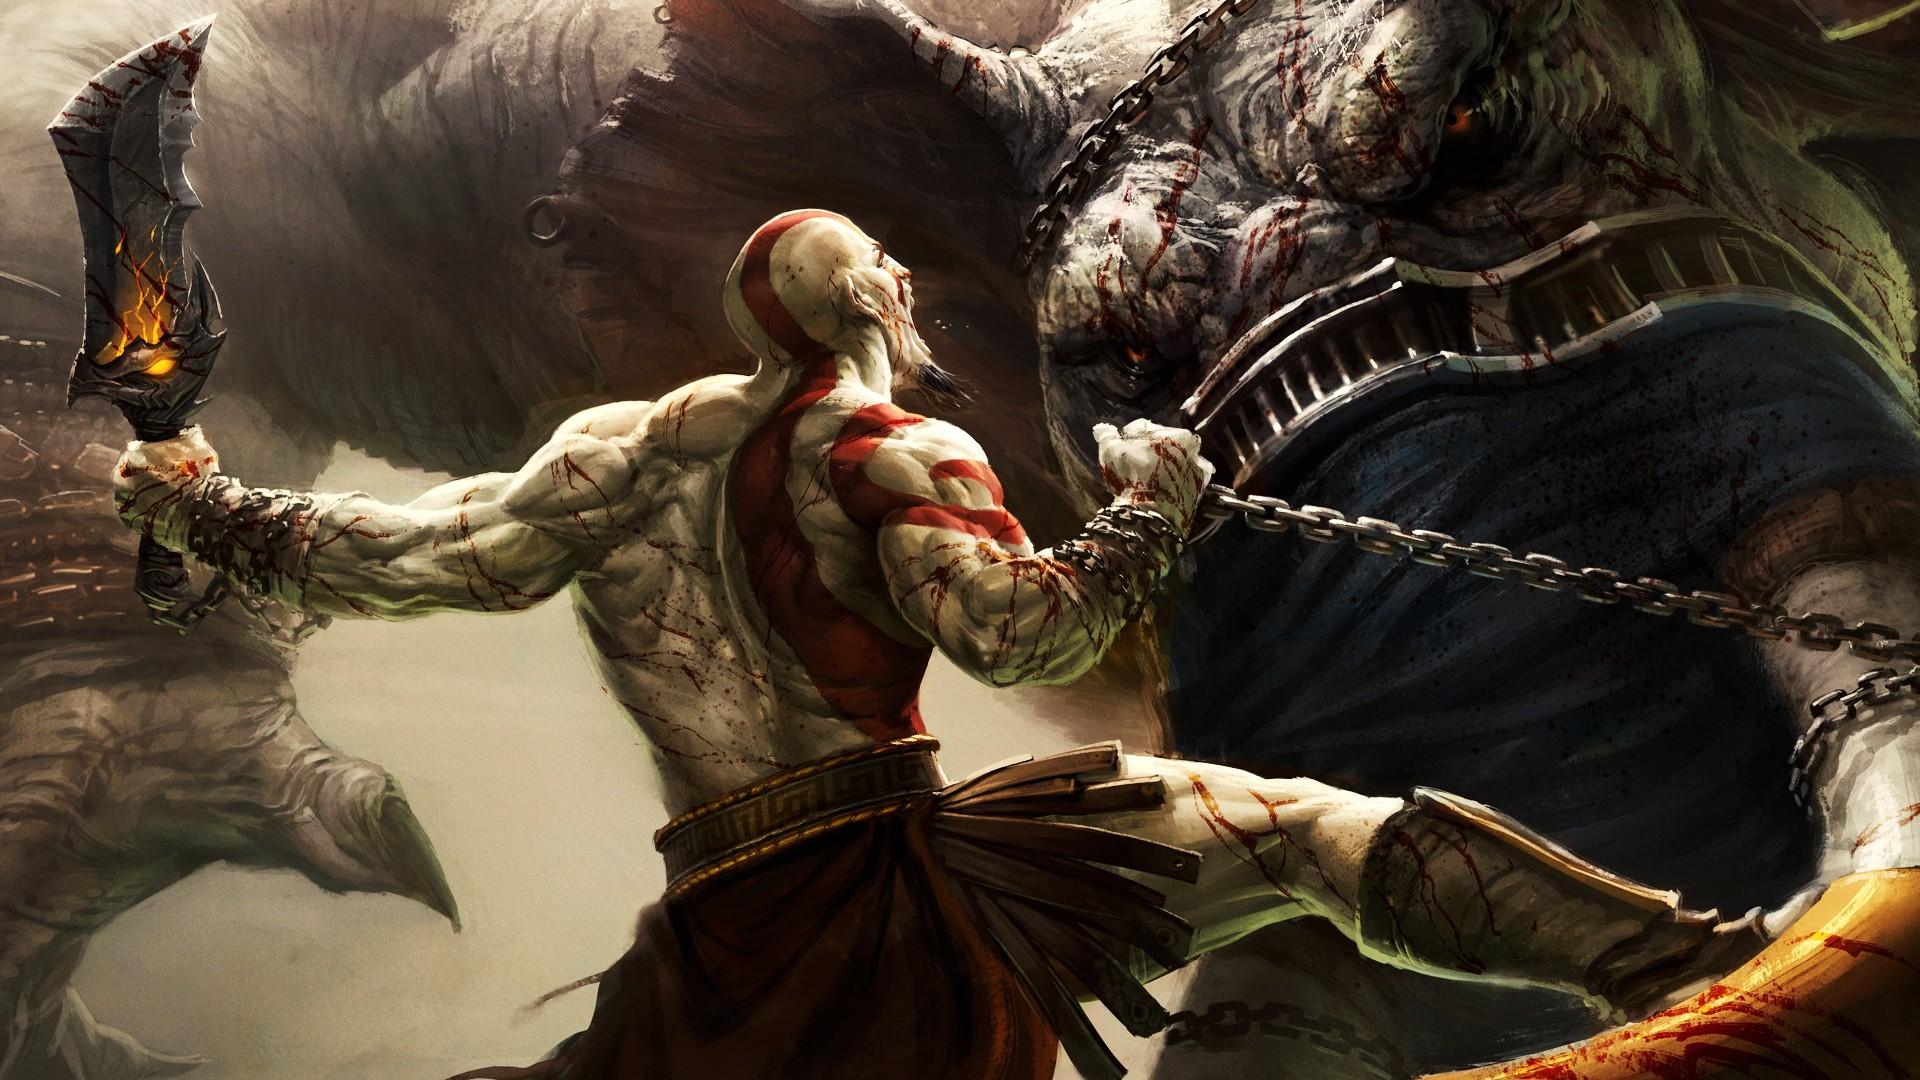 God of War: Ascension: hero is fighting wallpaper and image